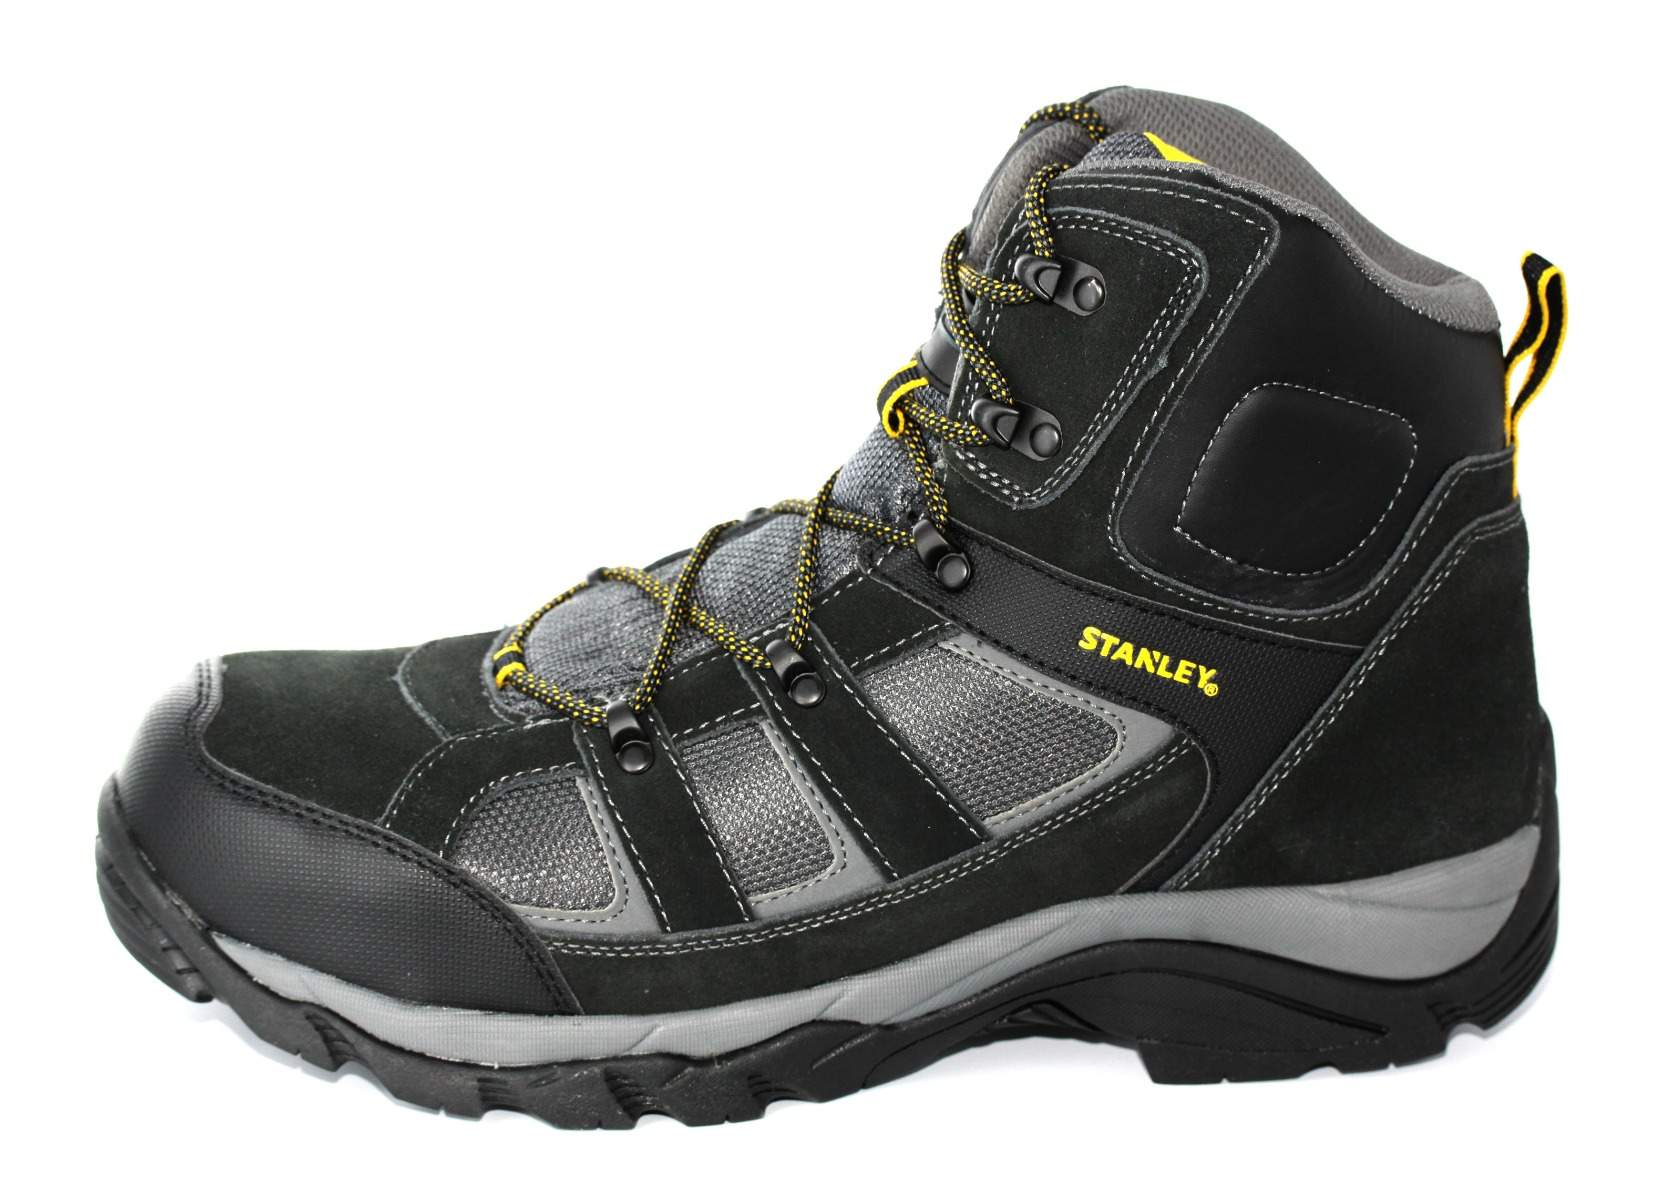 stanley impact safety boots